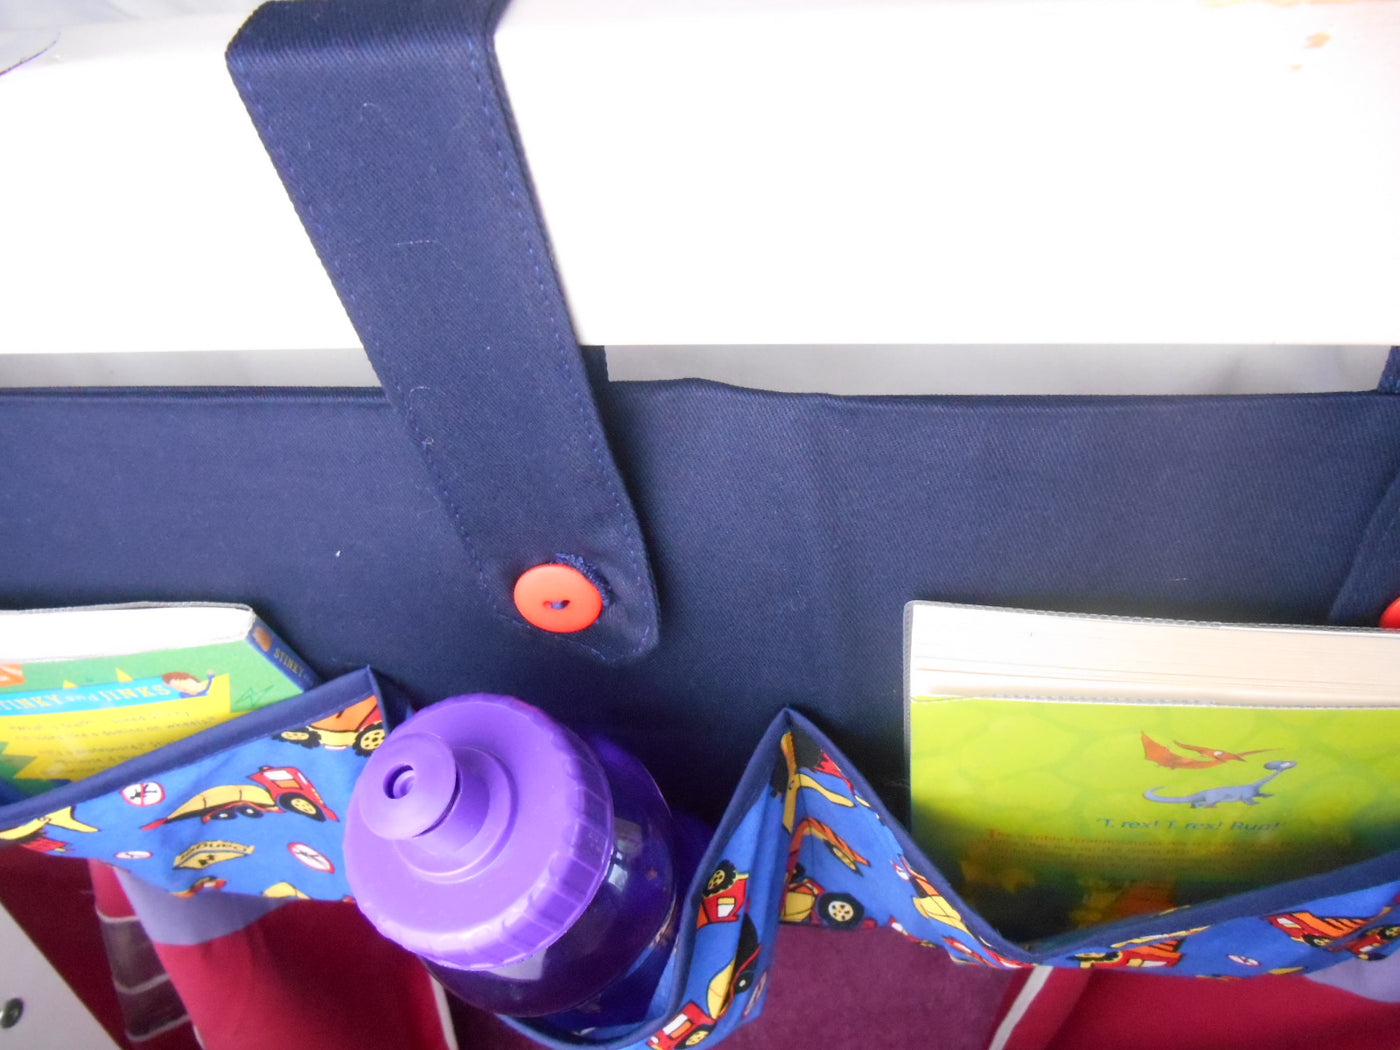 bed tidy for holding books and bottles in a cabin or bunk bed